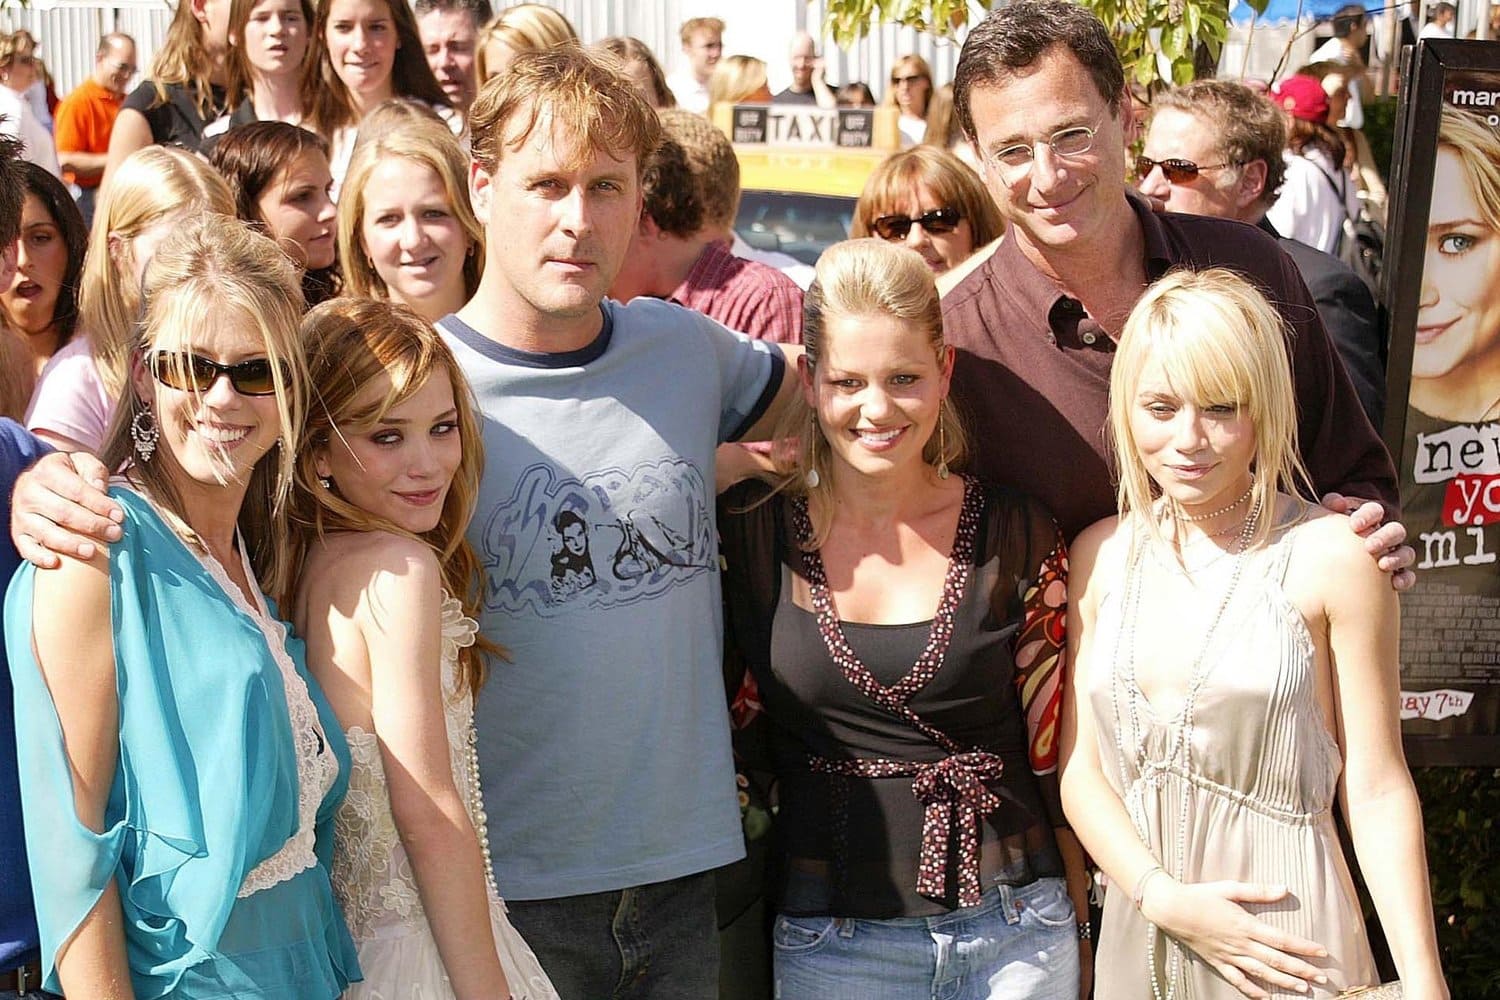 Jodie Sweetin, Mary-Kate Olsen, Dave Coulier, Candace Cameron Bure, Bob Saget, and Ashley Olsen in 2004 at the premiere of the American teen comedy film New York Minute